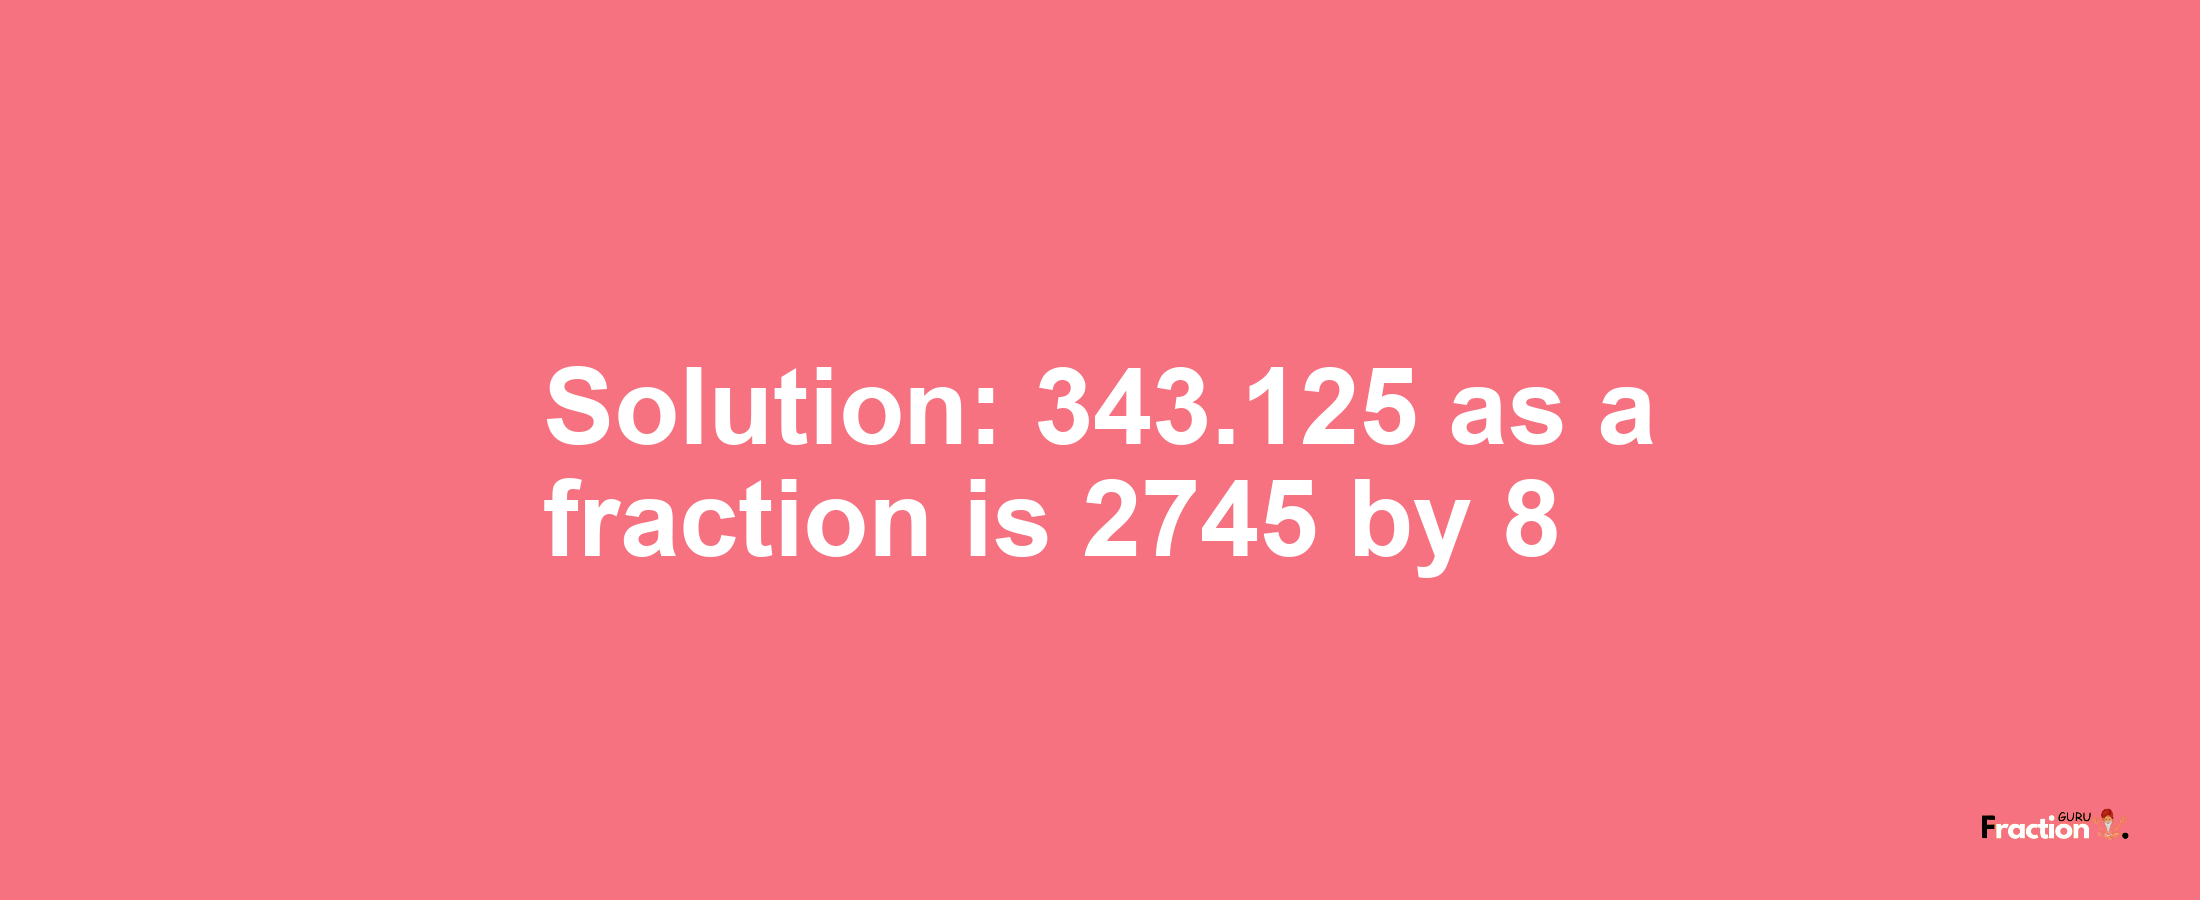 Solution:343.125 as a fraction is 2745/8